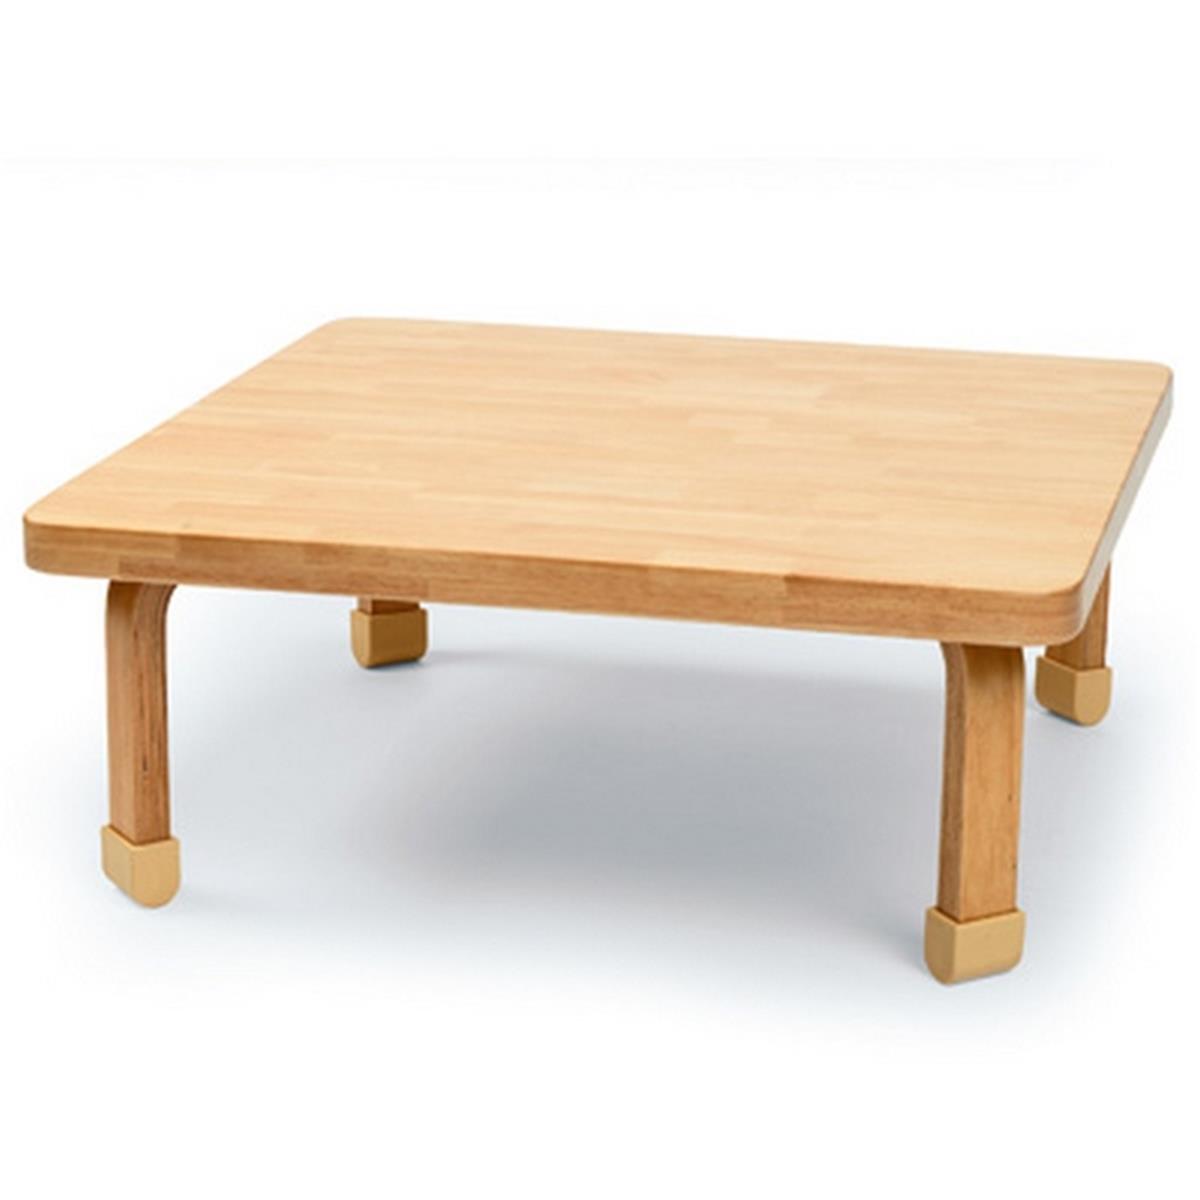 Angeles Ab7800l18 30 X 30 In. Square Naturalwood Table With 18 In. Legs